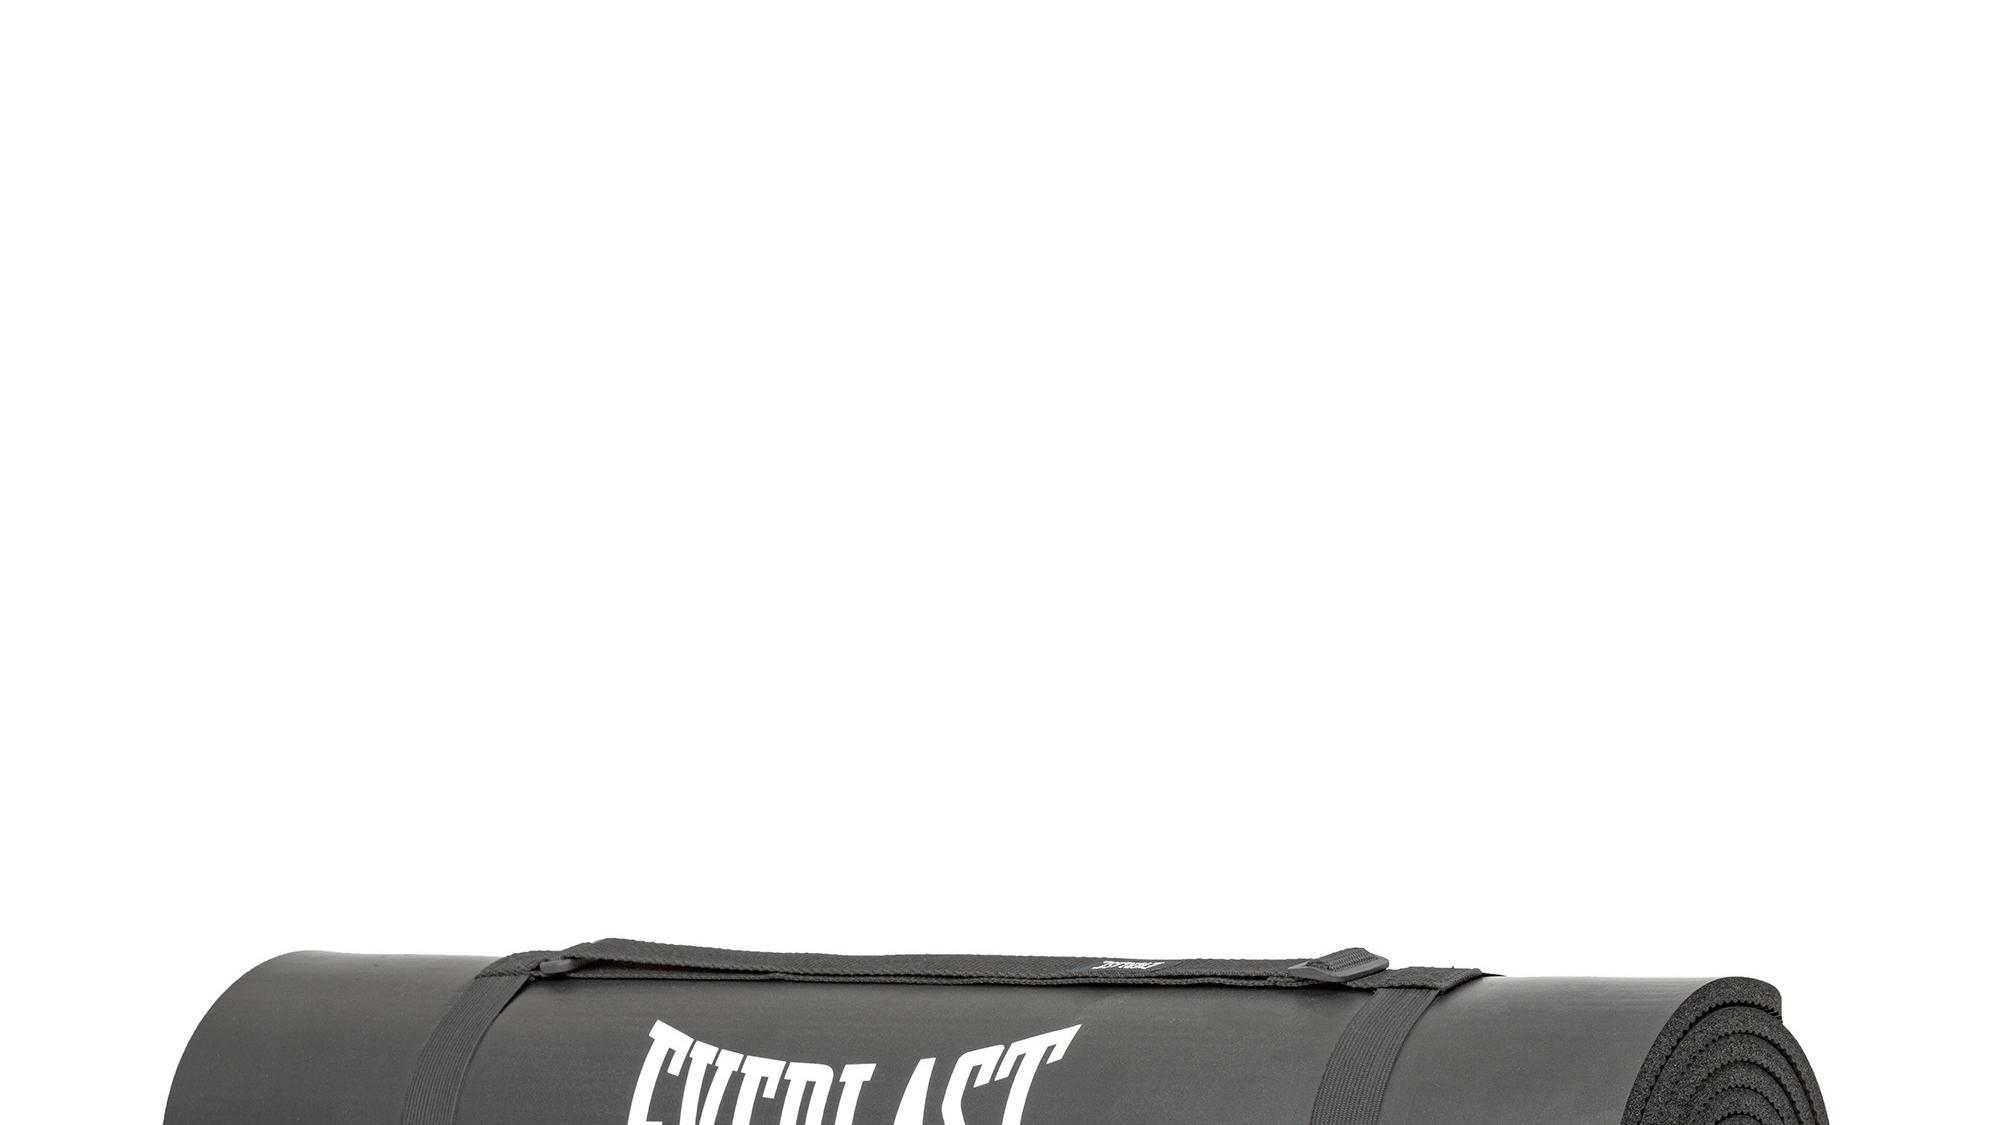 Sturdy And Skidproof yoga mat bags For Training 